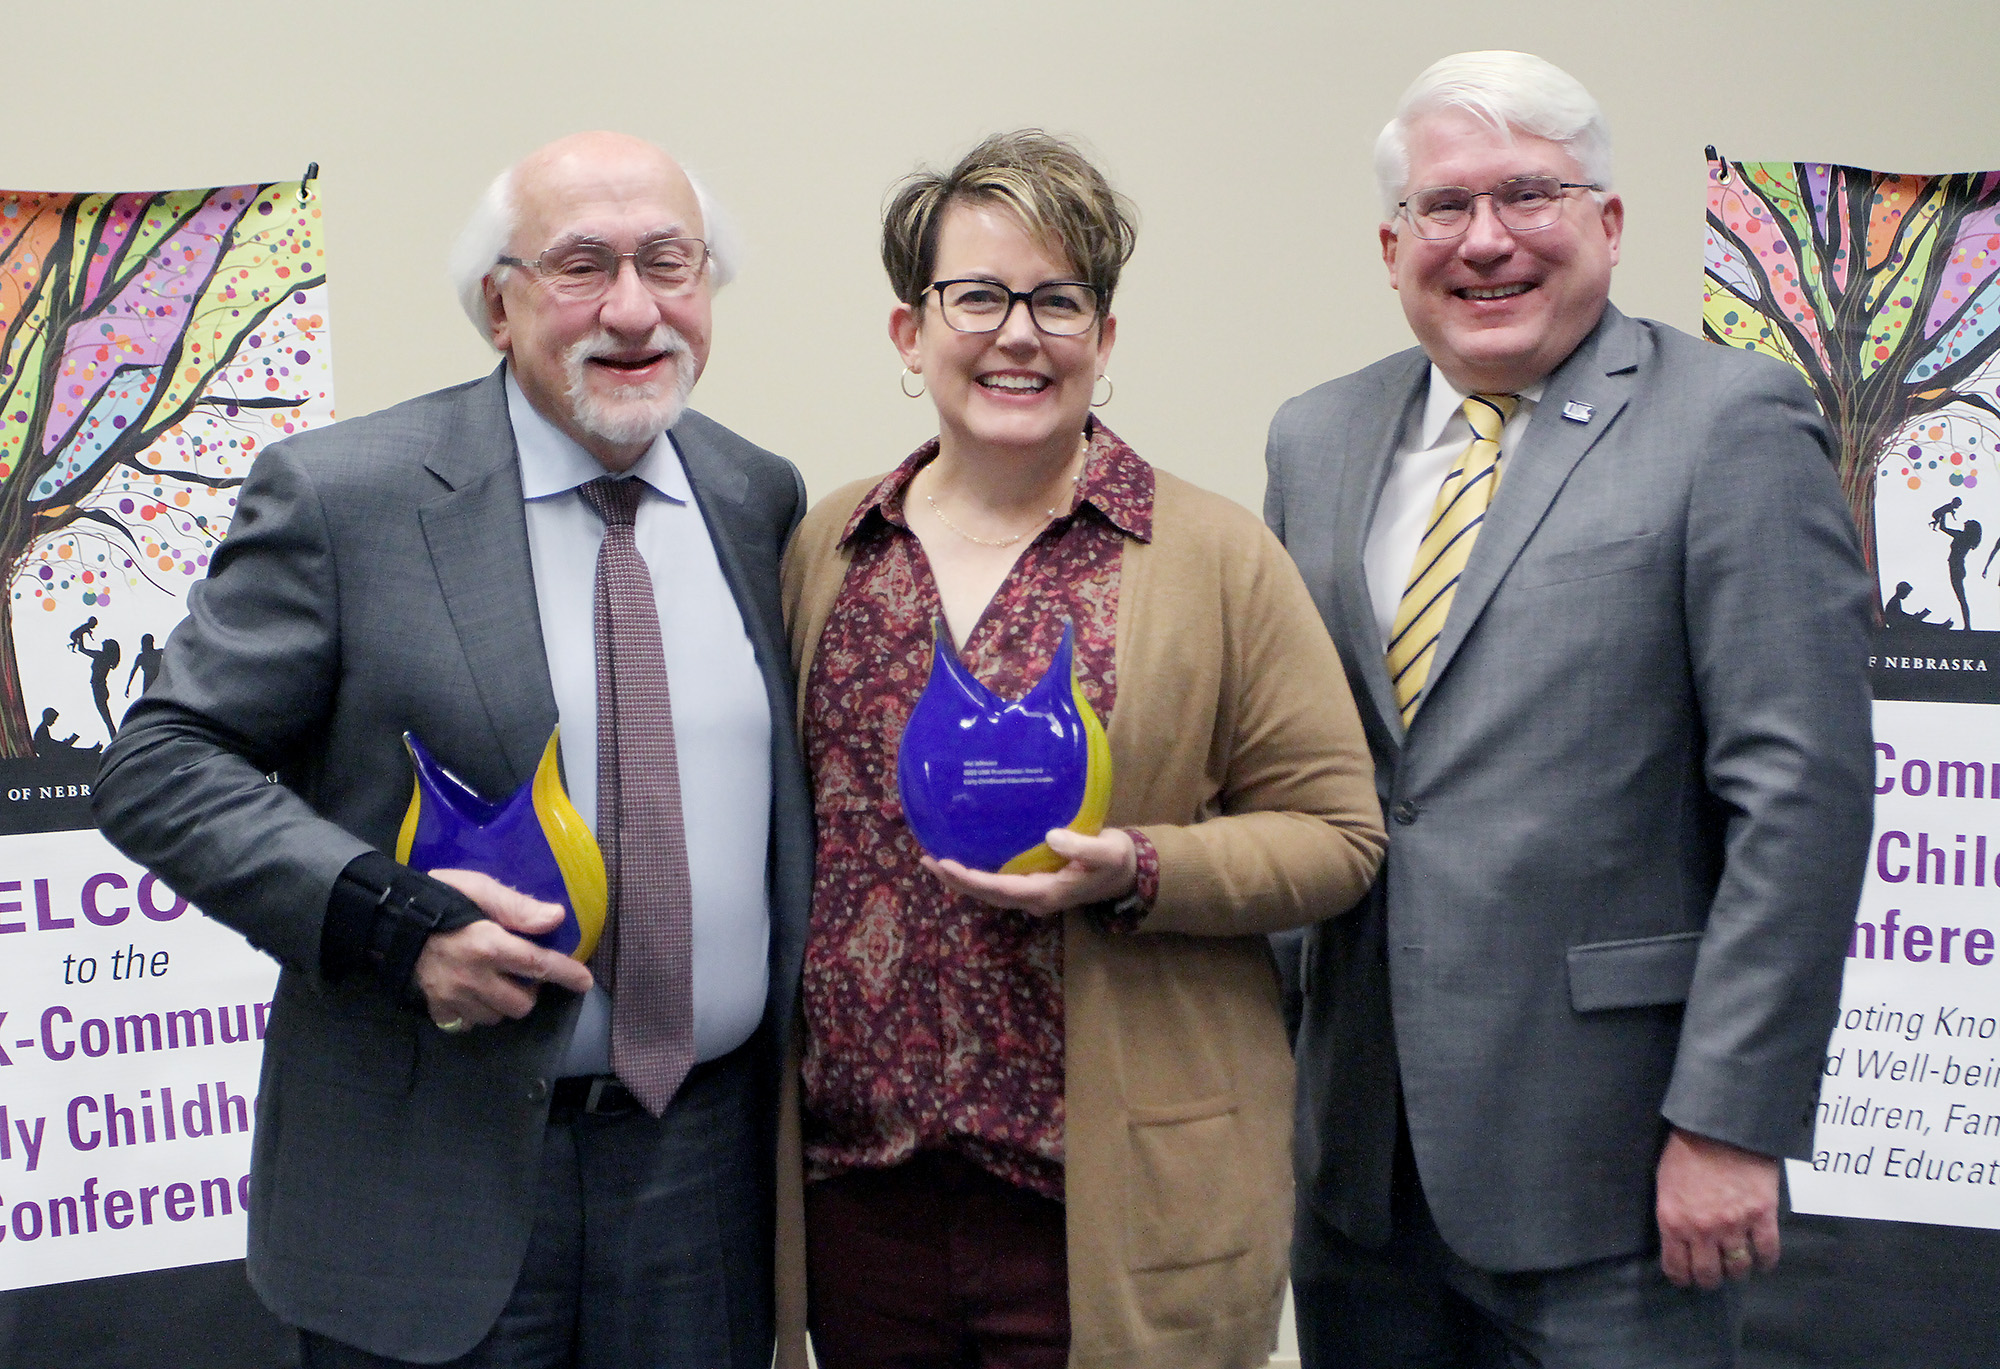 UNK College of Education Dean Mark Reid, right, is pictured with award recipients Samuel Meisels and Nici Johnson during Friday’s UNK-Community Early Childhood Conference.